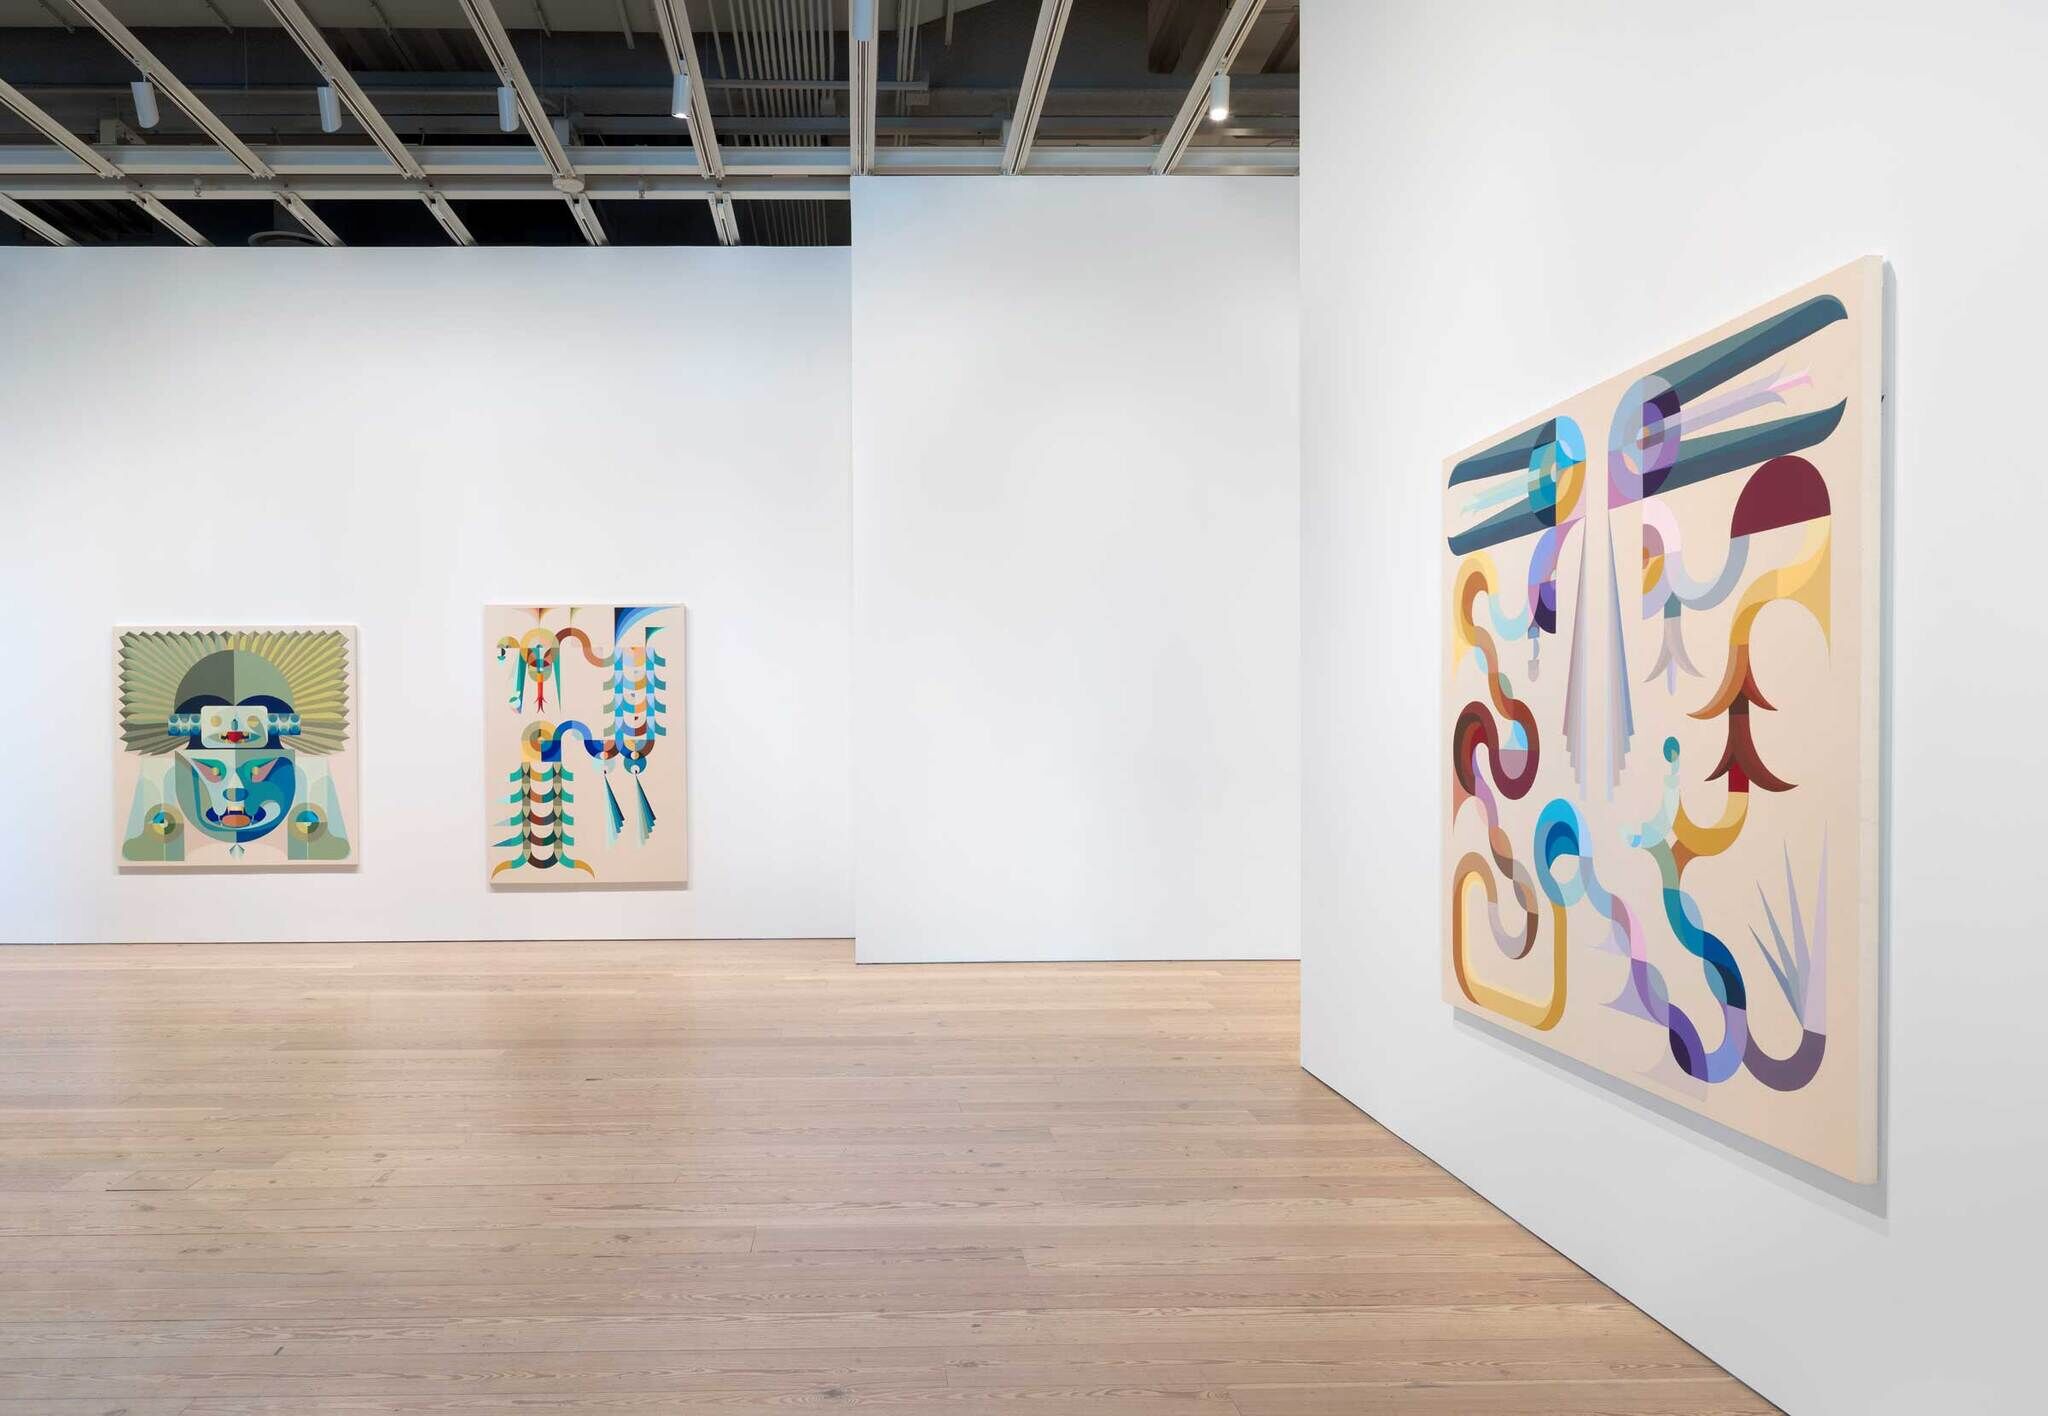 Modern art gallery interior with two colorful abstract paintings on white walls, wooden floor, and industrial ceiling.